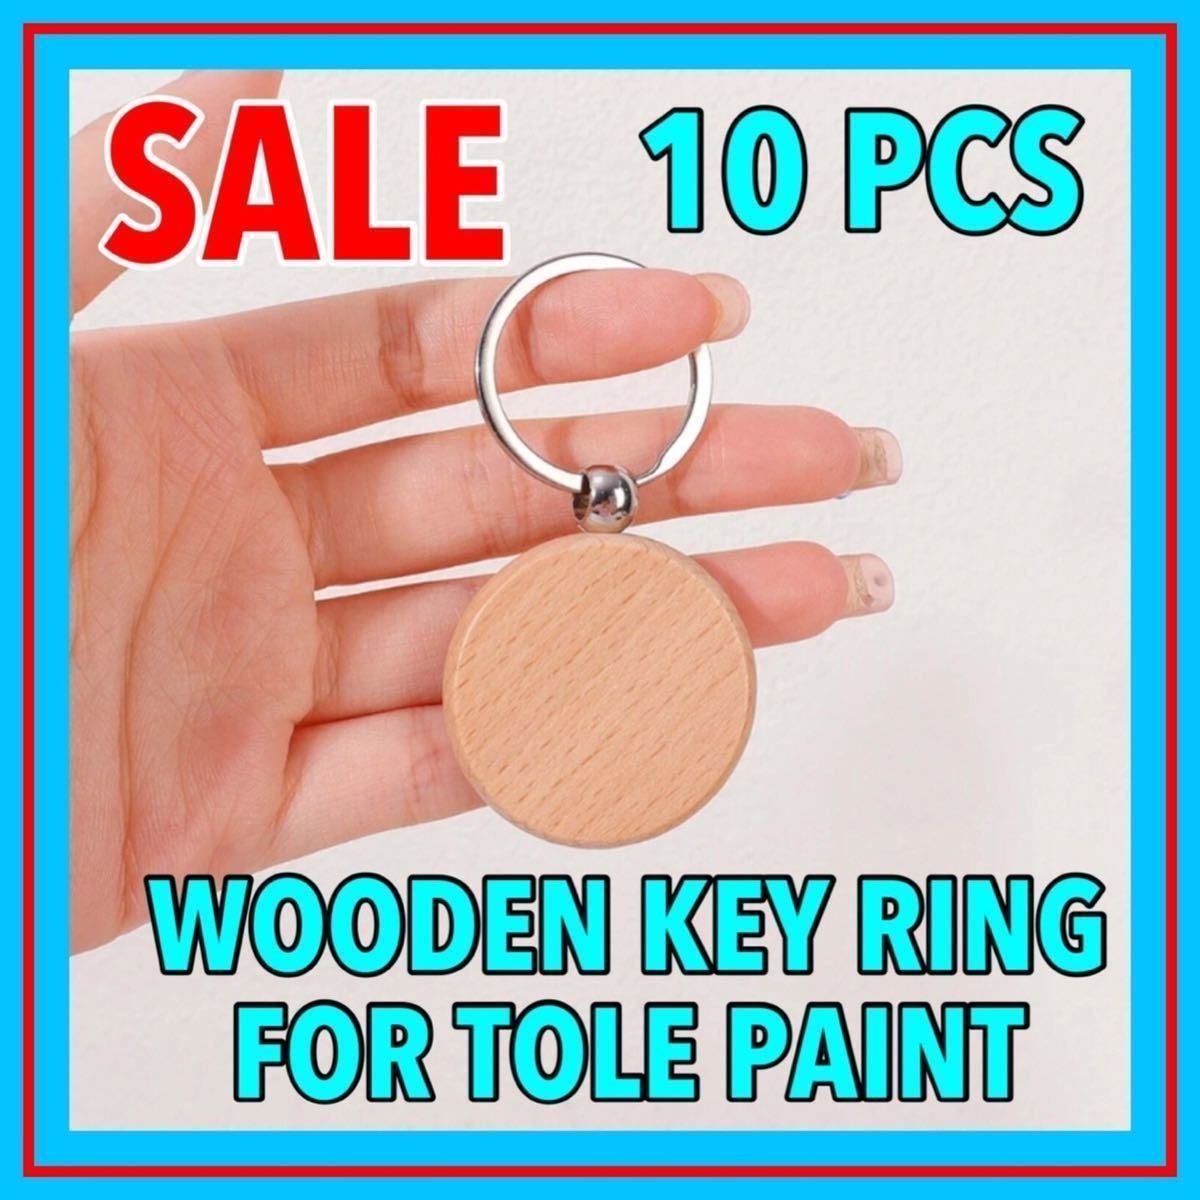 Tole painting materials Key ring Key holder Handmade Wooden products Interior Ornaments Miscellaneous goods Paint Materials Woodwork Interior, Handcraft, Handicrafts, Woodworking, paint, Tole painting